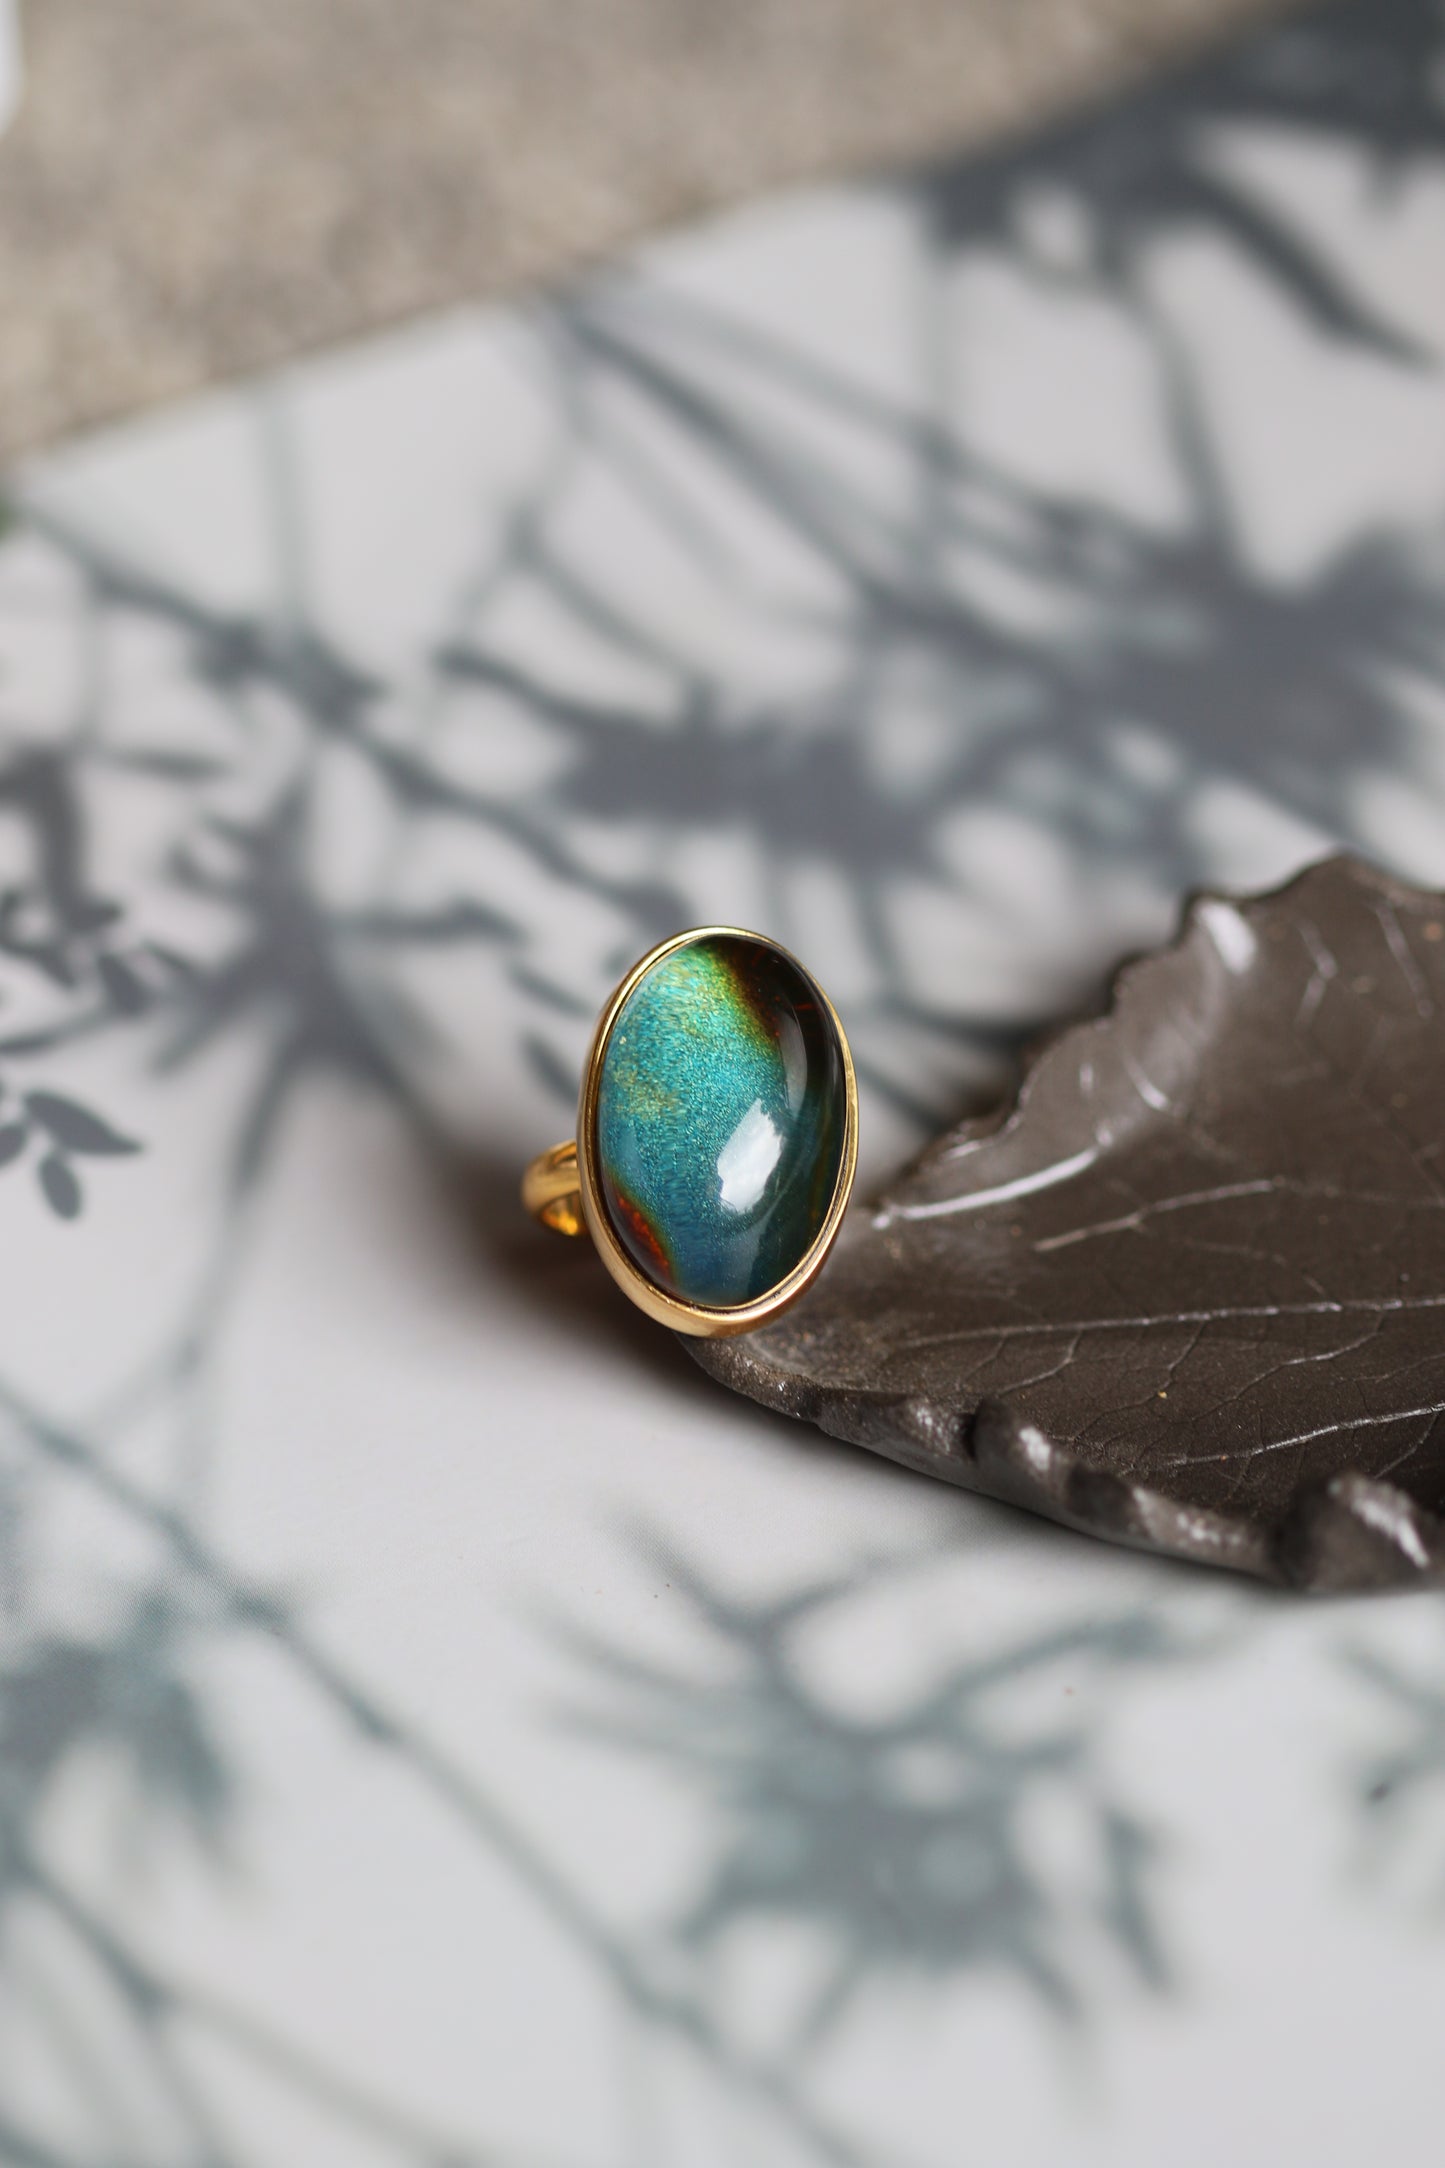 Blue Amber Ring with Natural Inclusions in Gold Plated Silver